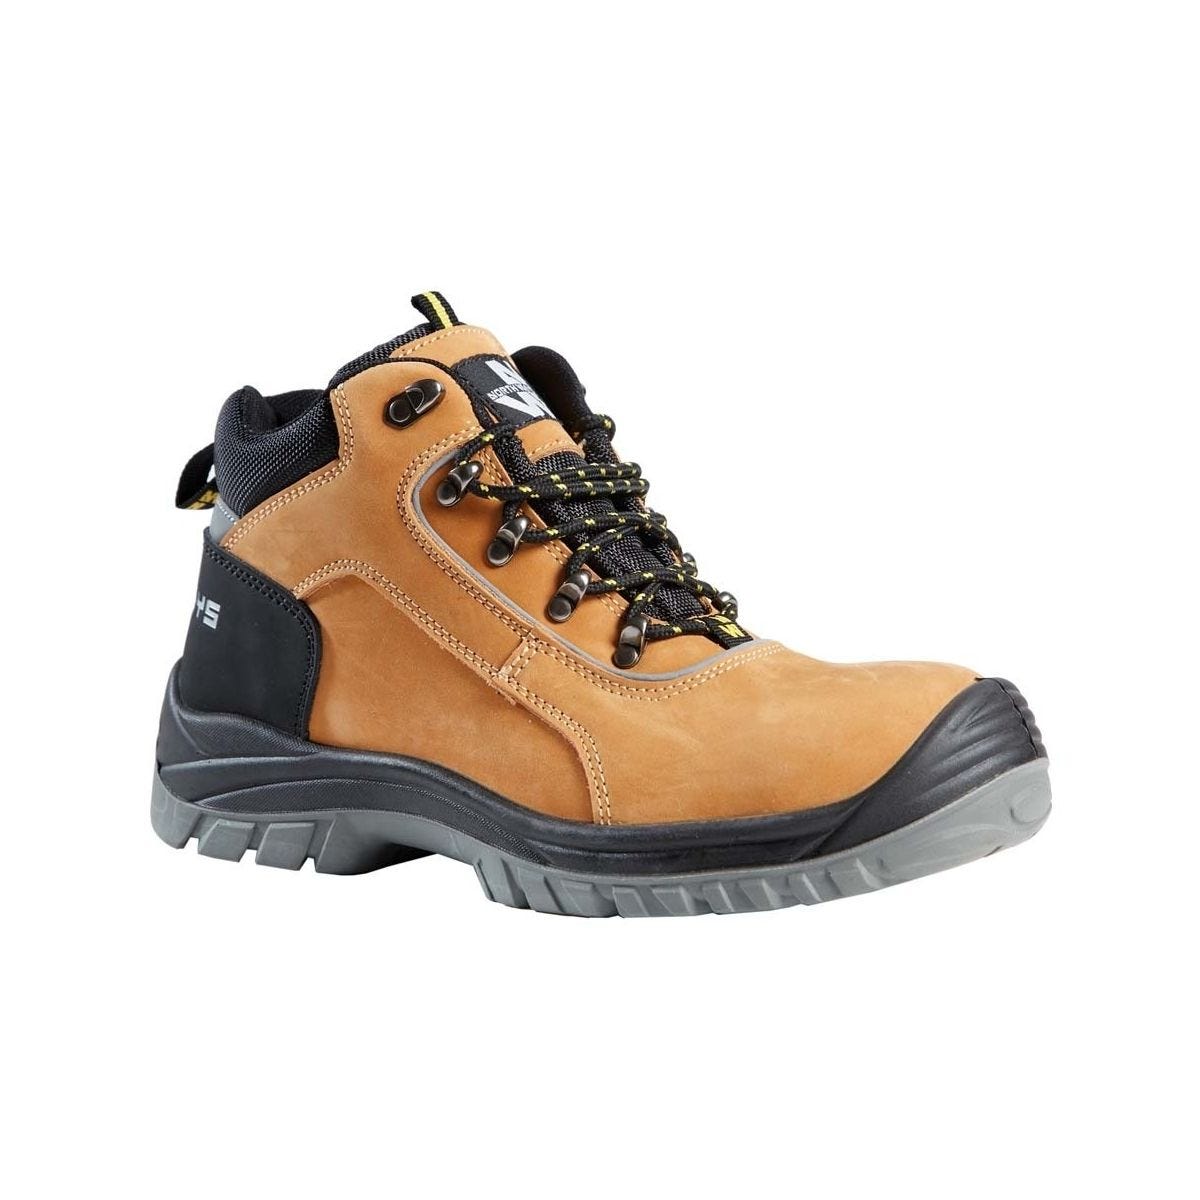 CHAUSSURES MONTANTES DE SECURITE RYAN CAMEL - NORTH WAYS - Taille 45 0